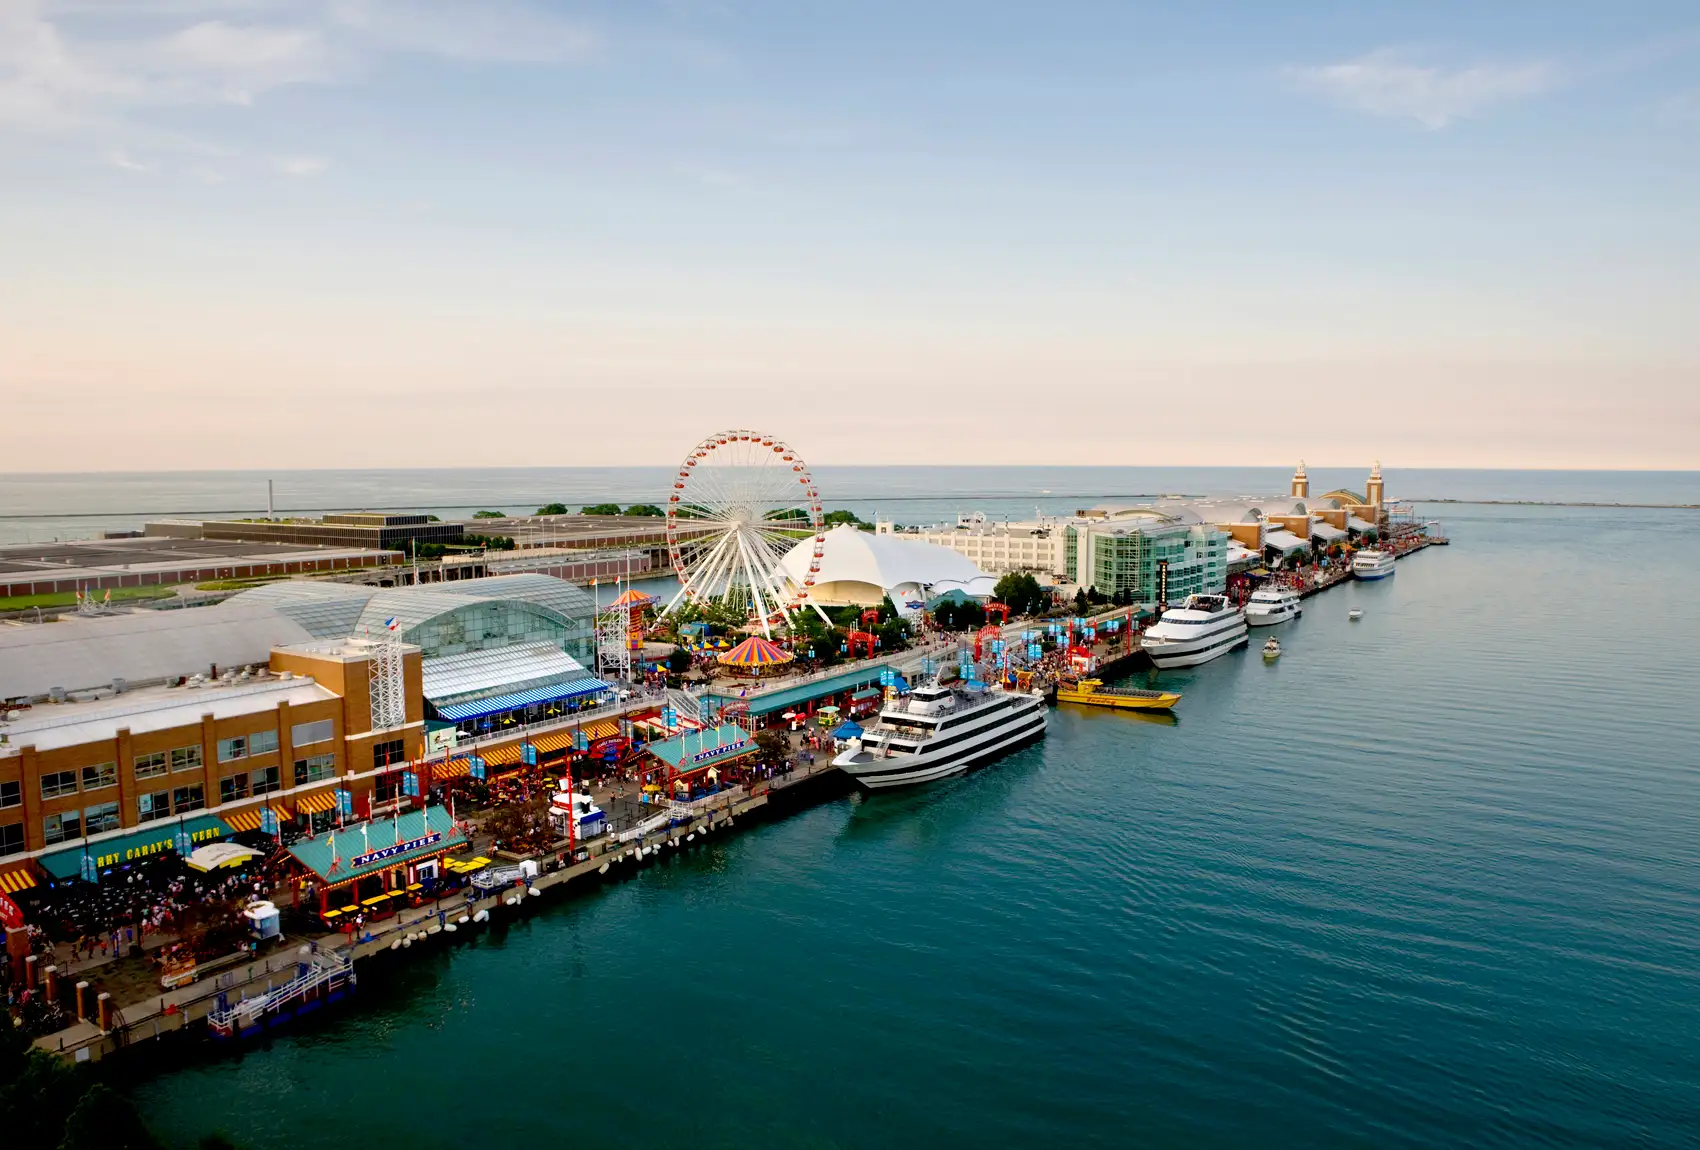 Southwest view of Navy Pier, Chicago, IL.